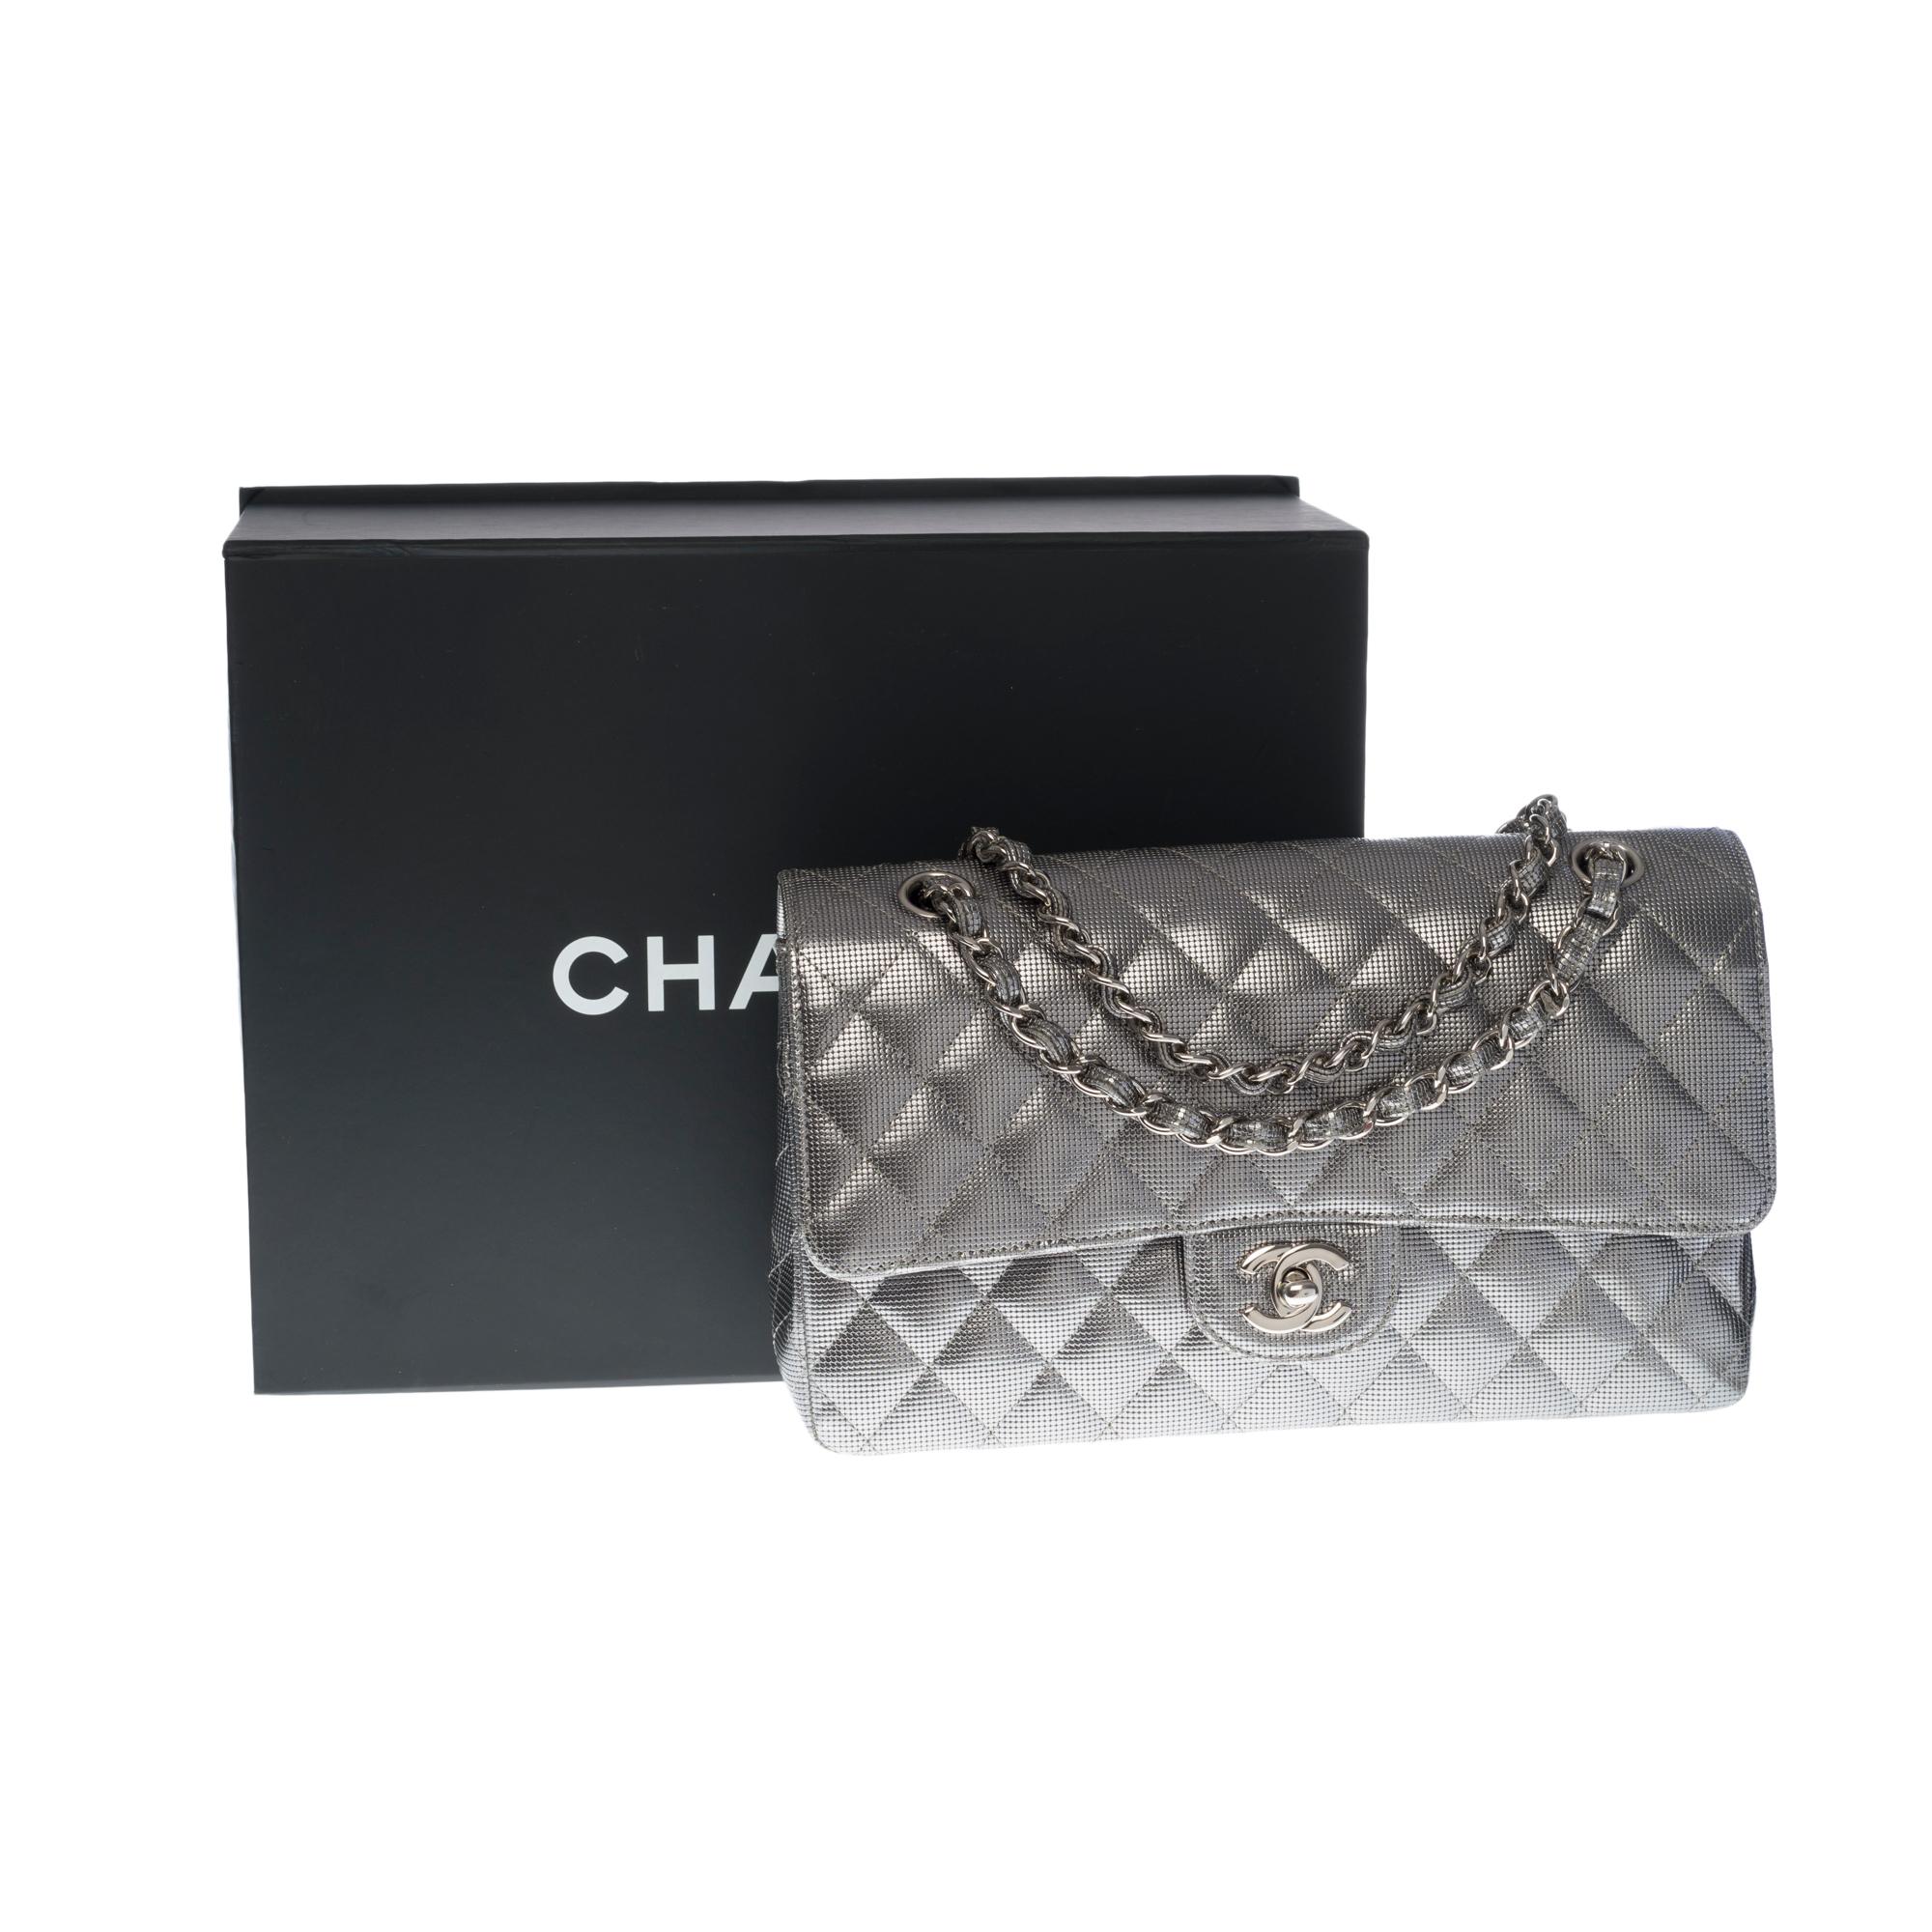 Chanel Timeless double flap Shoulder bag in Silver Metal quilted leather, SHW 8